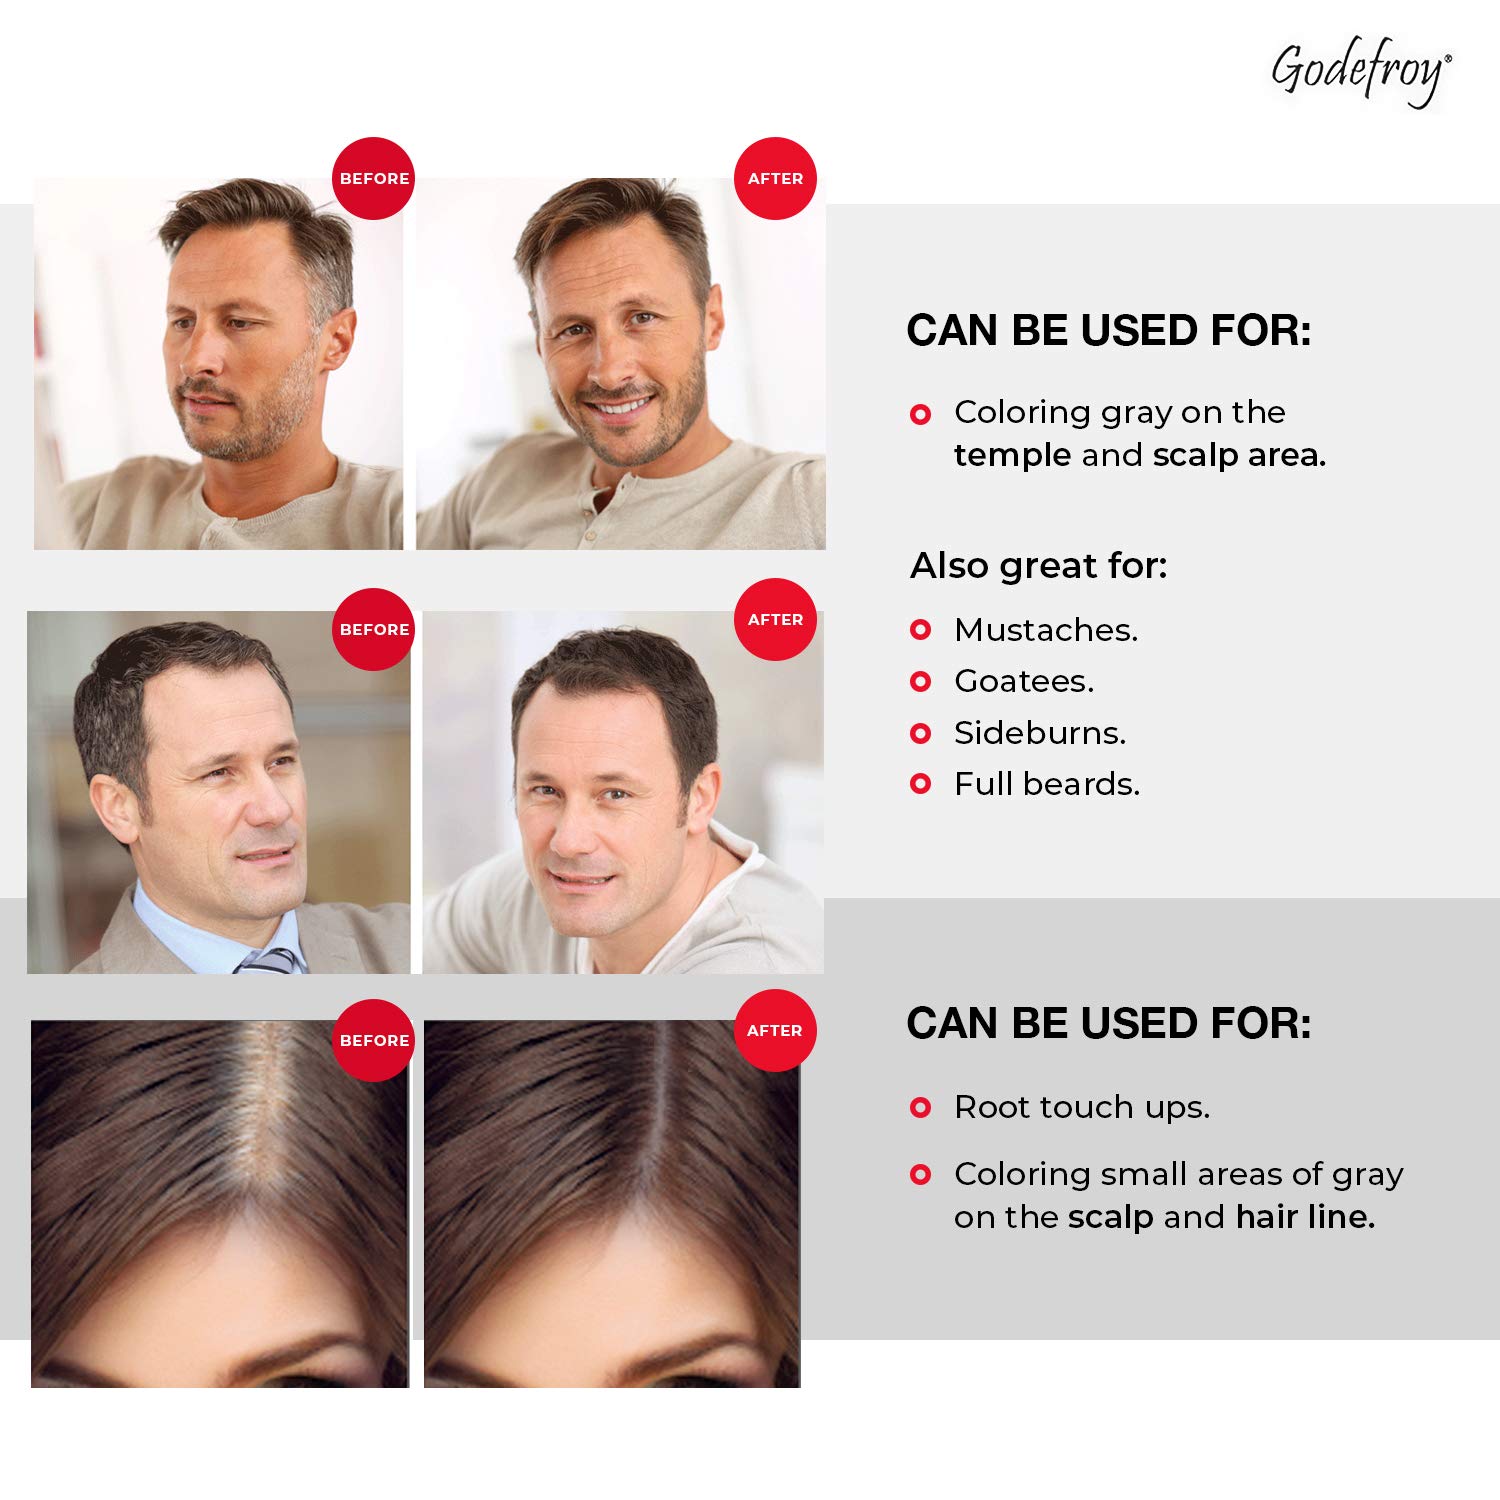 Godefroy Hair Color Kit for Spot Coloring Great For Small Areas Covers Up Gray Hairs Assorted Colors Available 4 Applicaion Kit, Light Brown, 1 Count